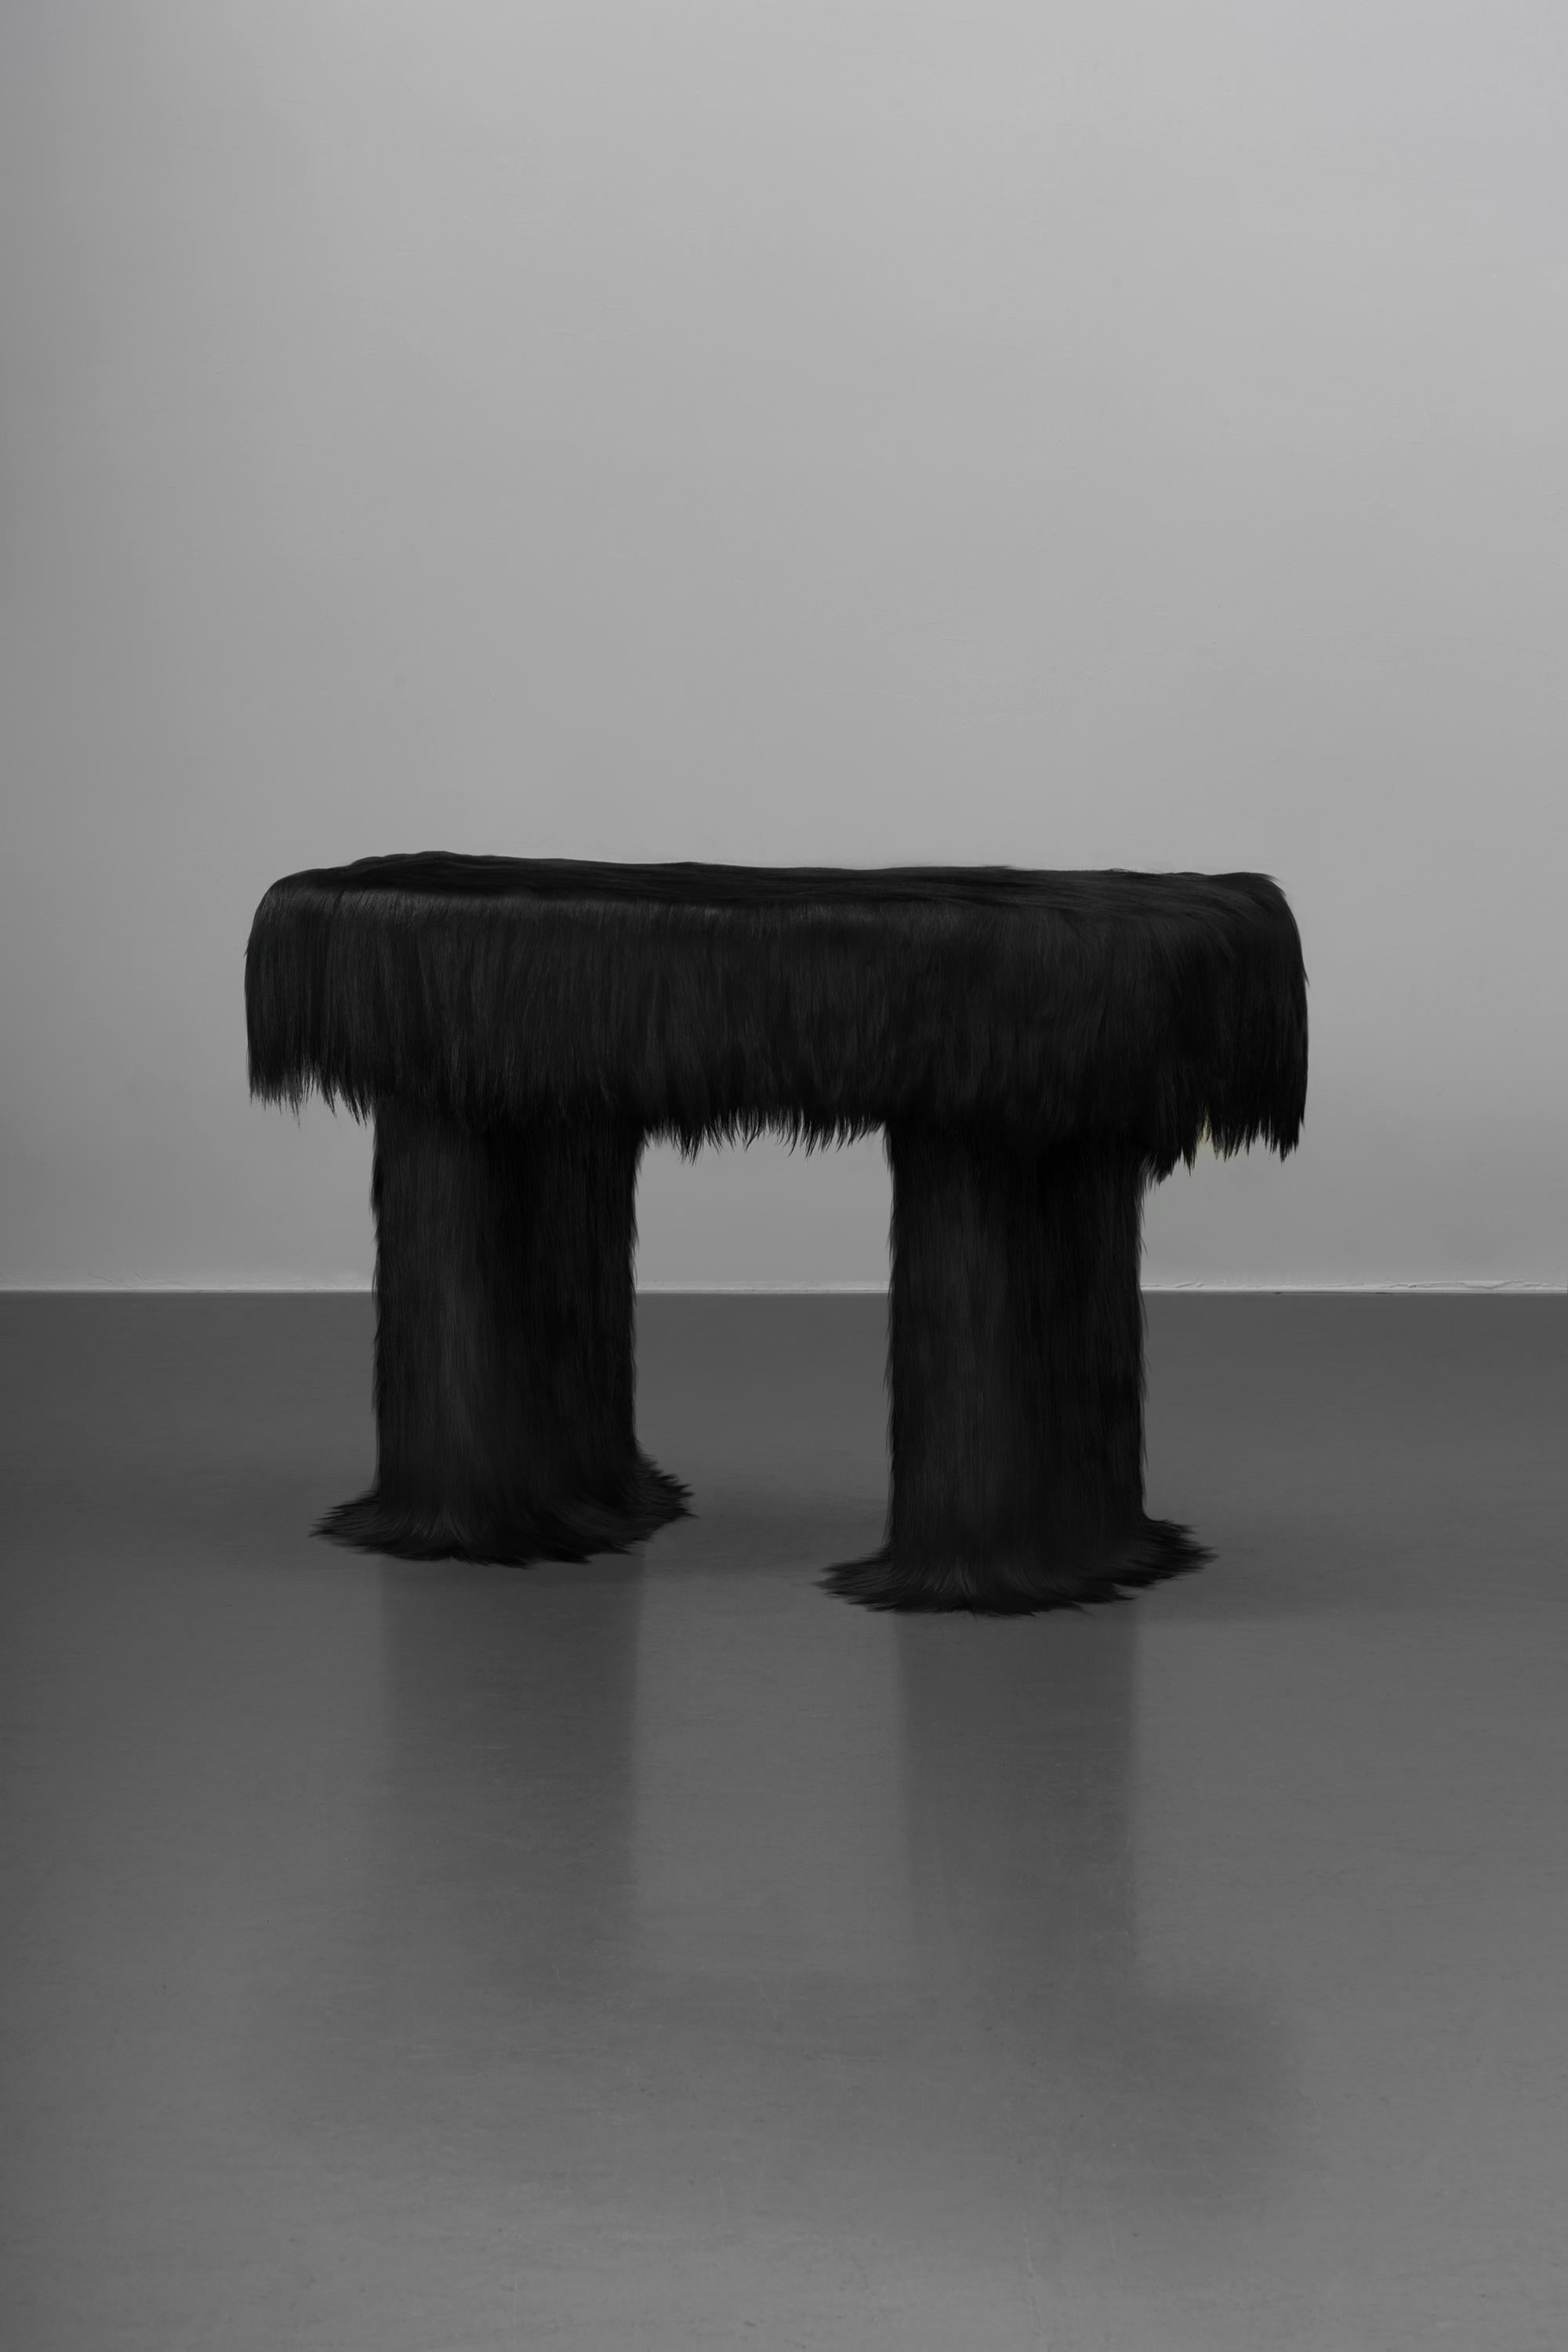 Raw Console Table by Atelier V&F
Limited Edition Of 10+2AP Pieces.
Dimensions: D 45 x W 120 x H 79 cm.
Materials: Goatskin offcuts

Inspired by the earth goddess Gaia,「Revelation of Gaia」aims to explore the mighty but soft inner power and to praise